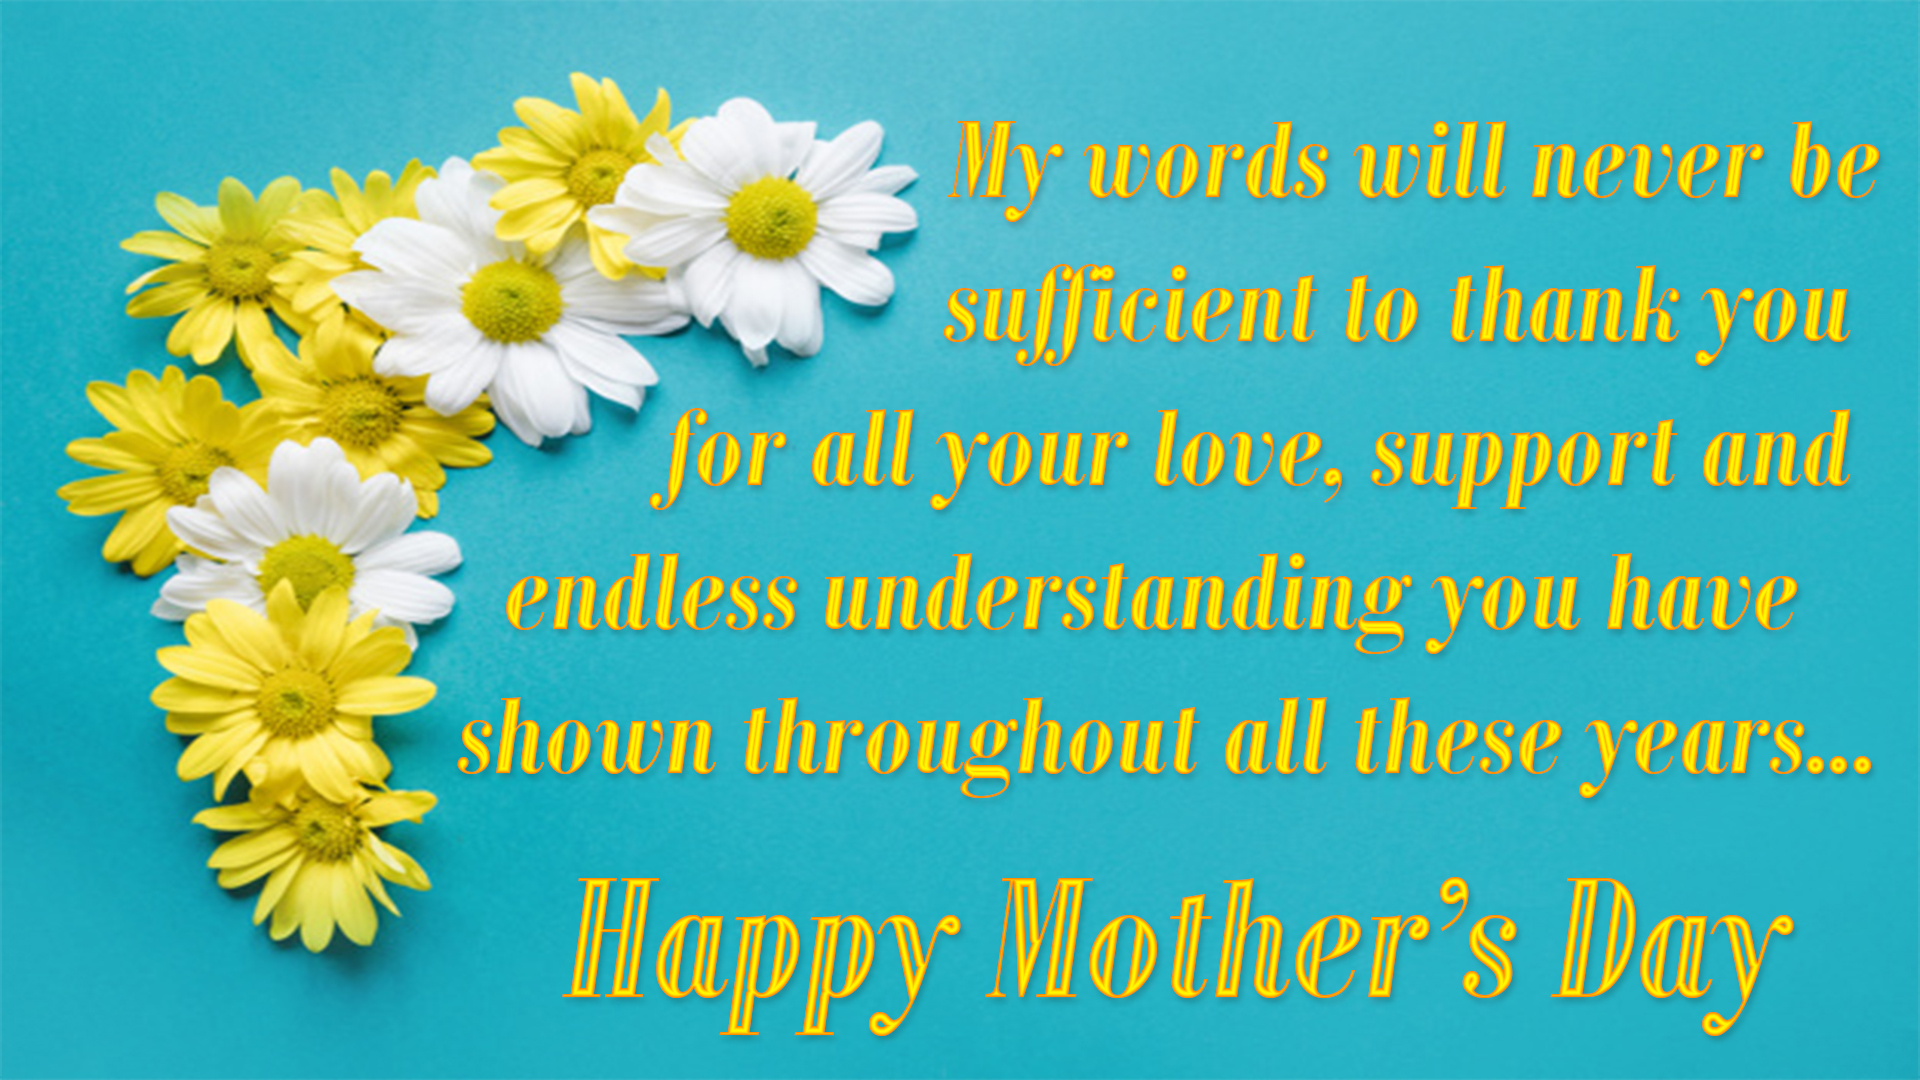 Lovely Happy Mothers Day Wishes & Messages Images